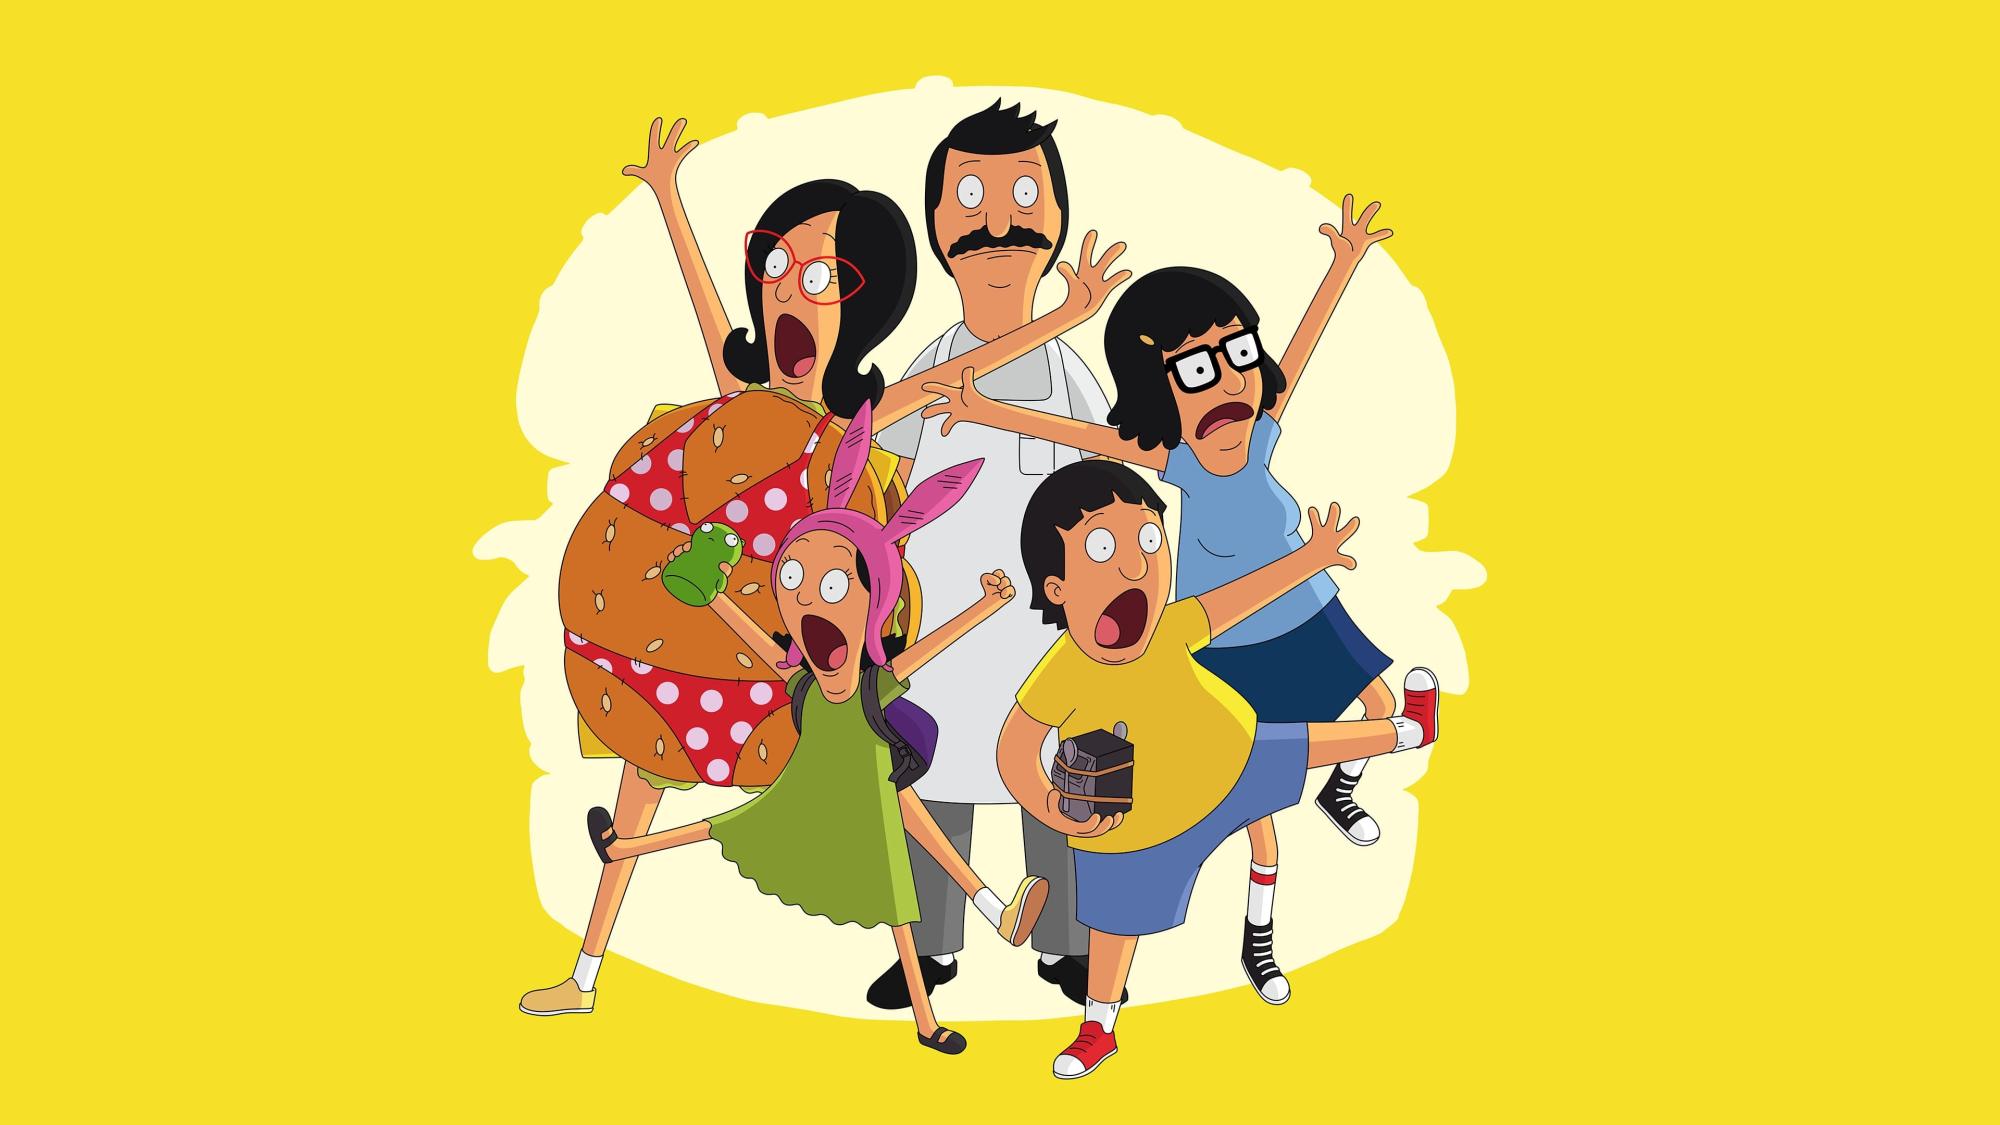 Backdrop Image for The Bob's Burgers Movie